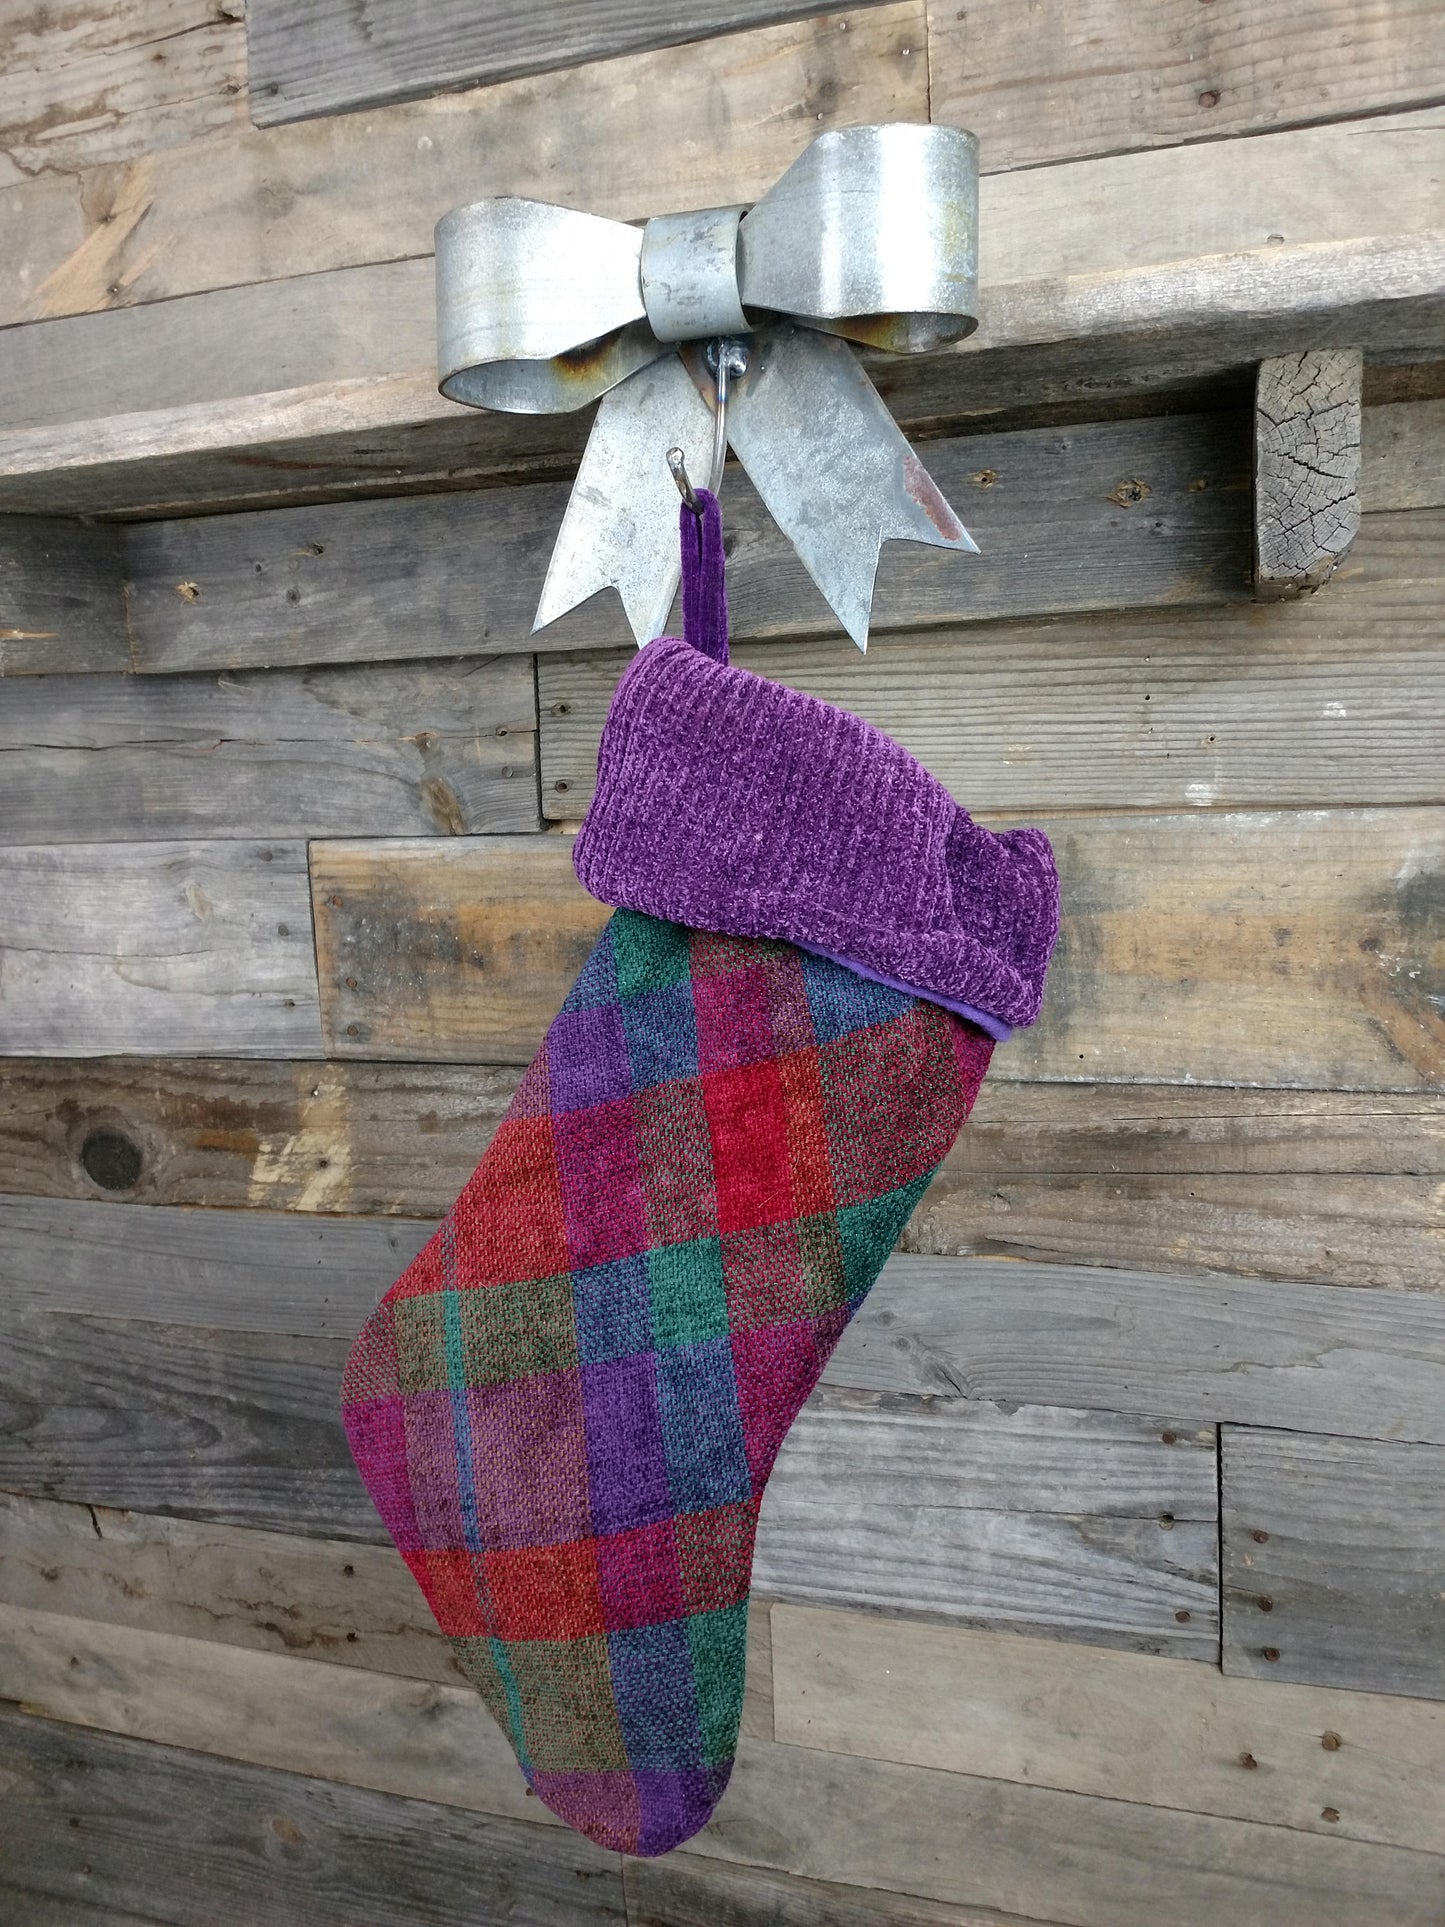 Wine Barrel Ring Bow Stocking Holder - Totini - Made from retired California wine barrel rings. 100% Recycled!